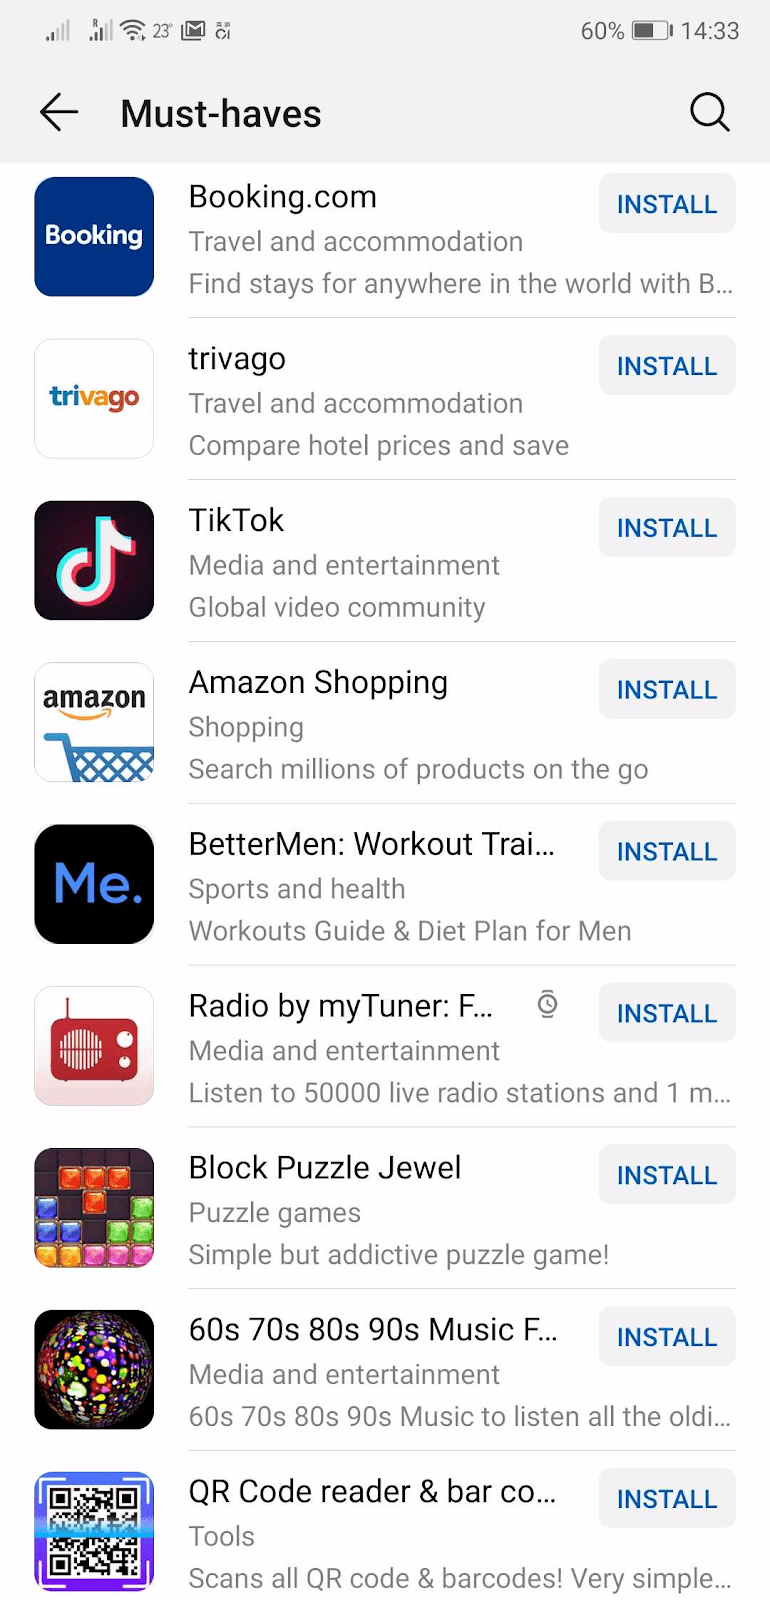 must-have apps